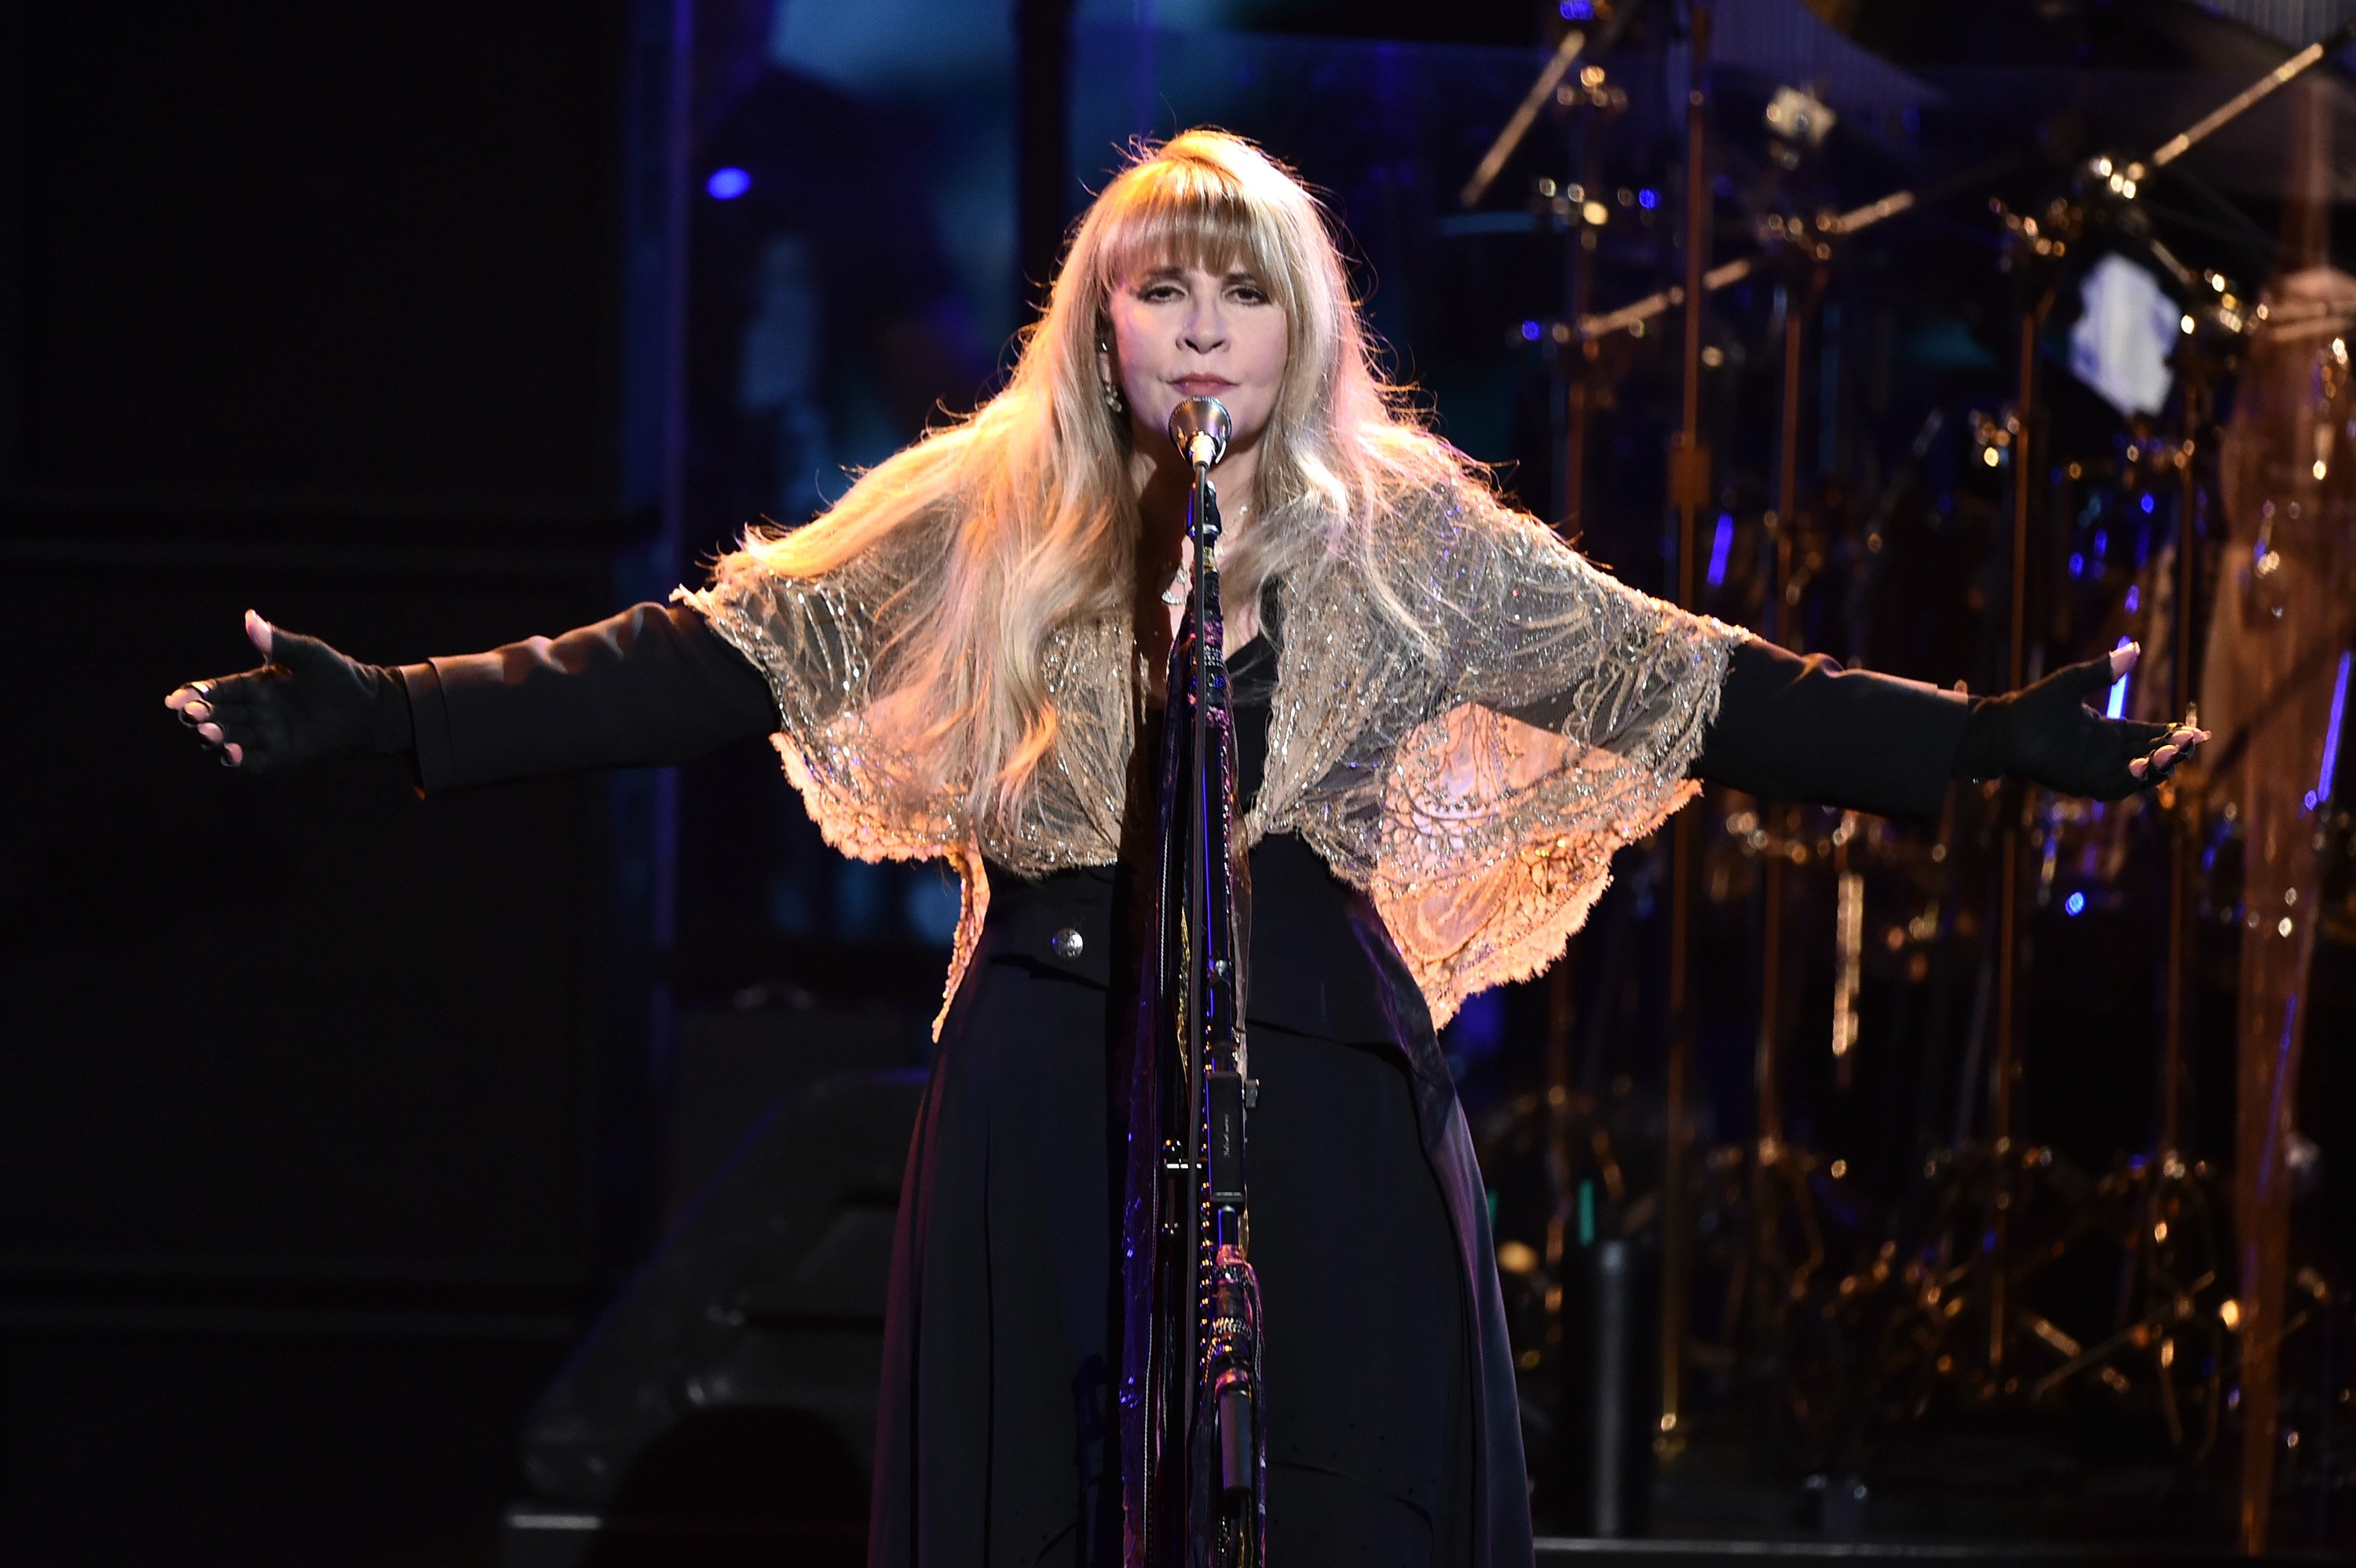 Stevie Nicks stretches her arms out during a concert while wearing a black outfit and sheer shawl.